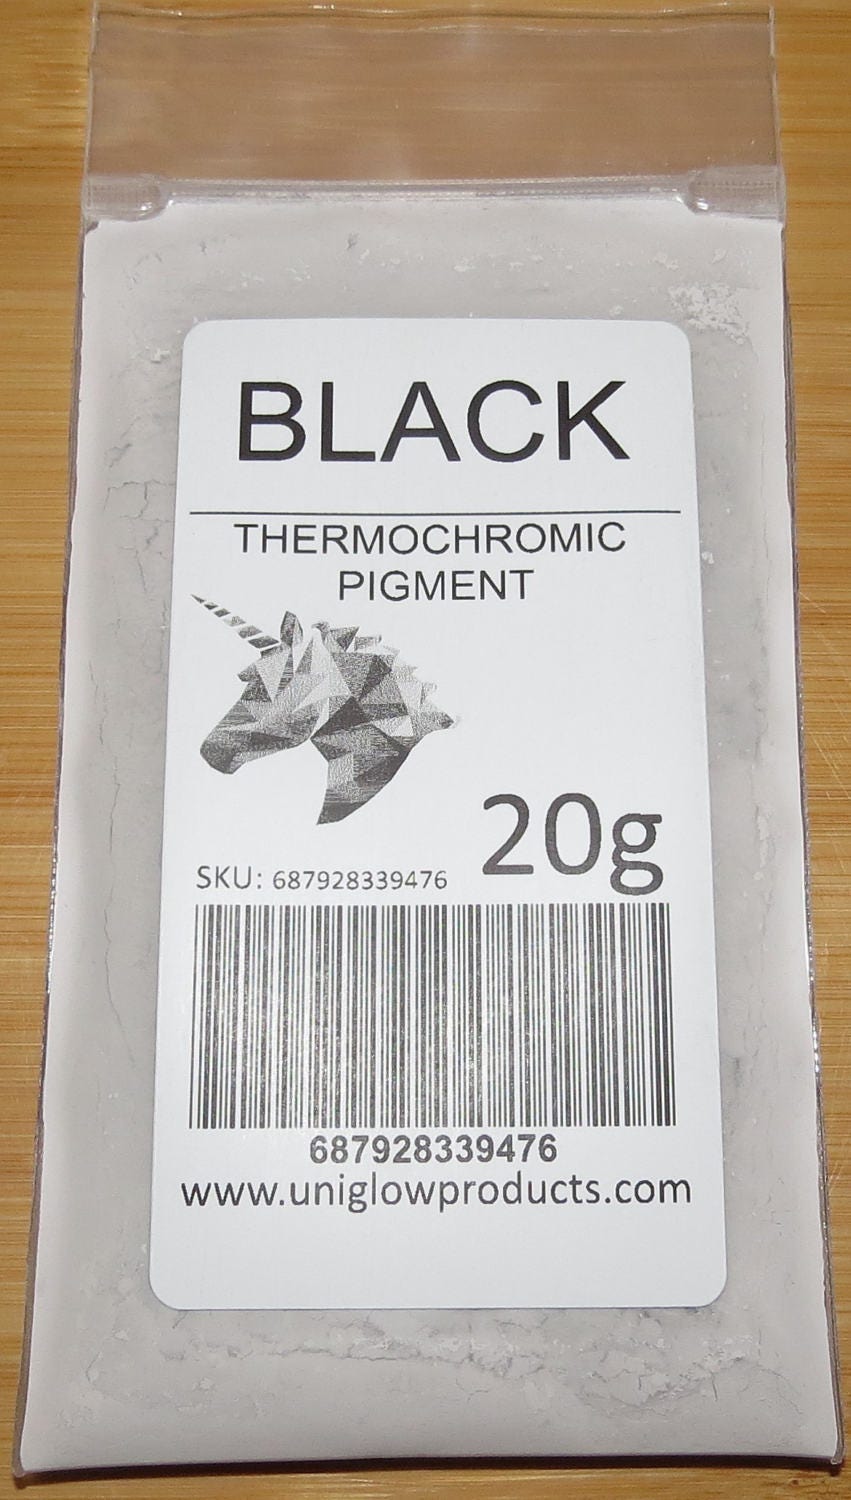 PRESTIGE THERMOCHROMIC PIGMENT That Changes Color at 88ºF 31ºC 21 Color  Choices Available Uniglow Products Llc 